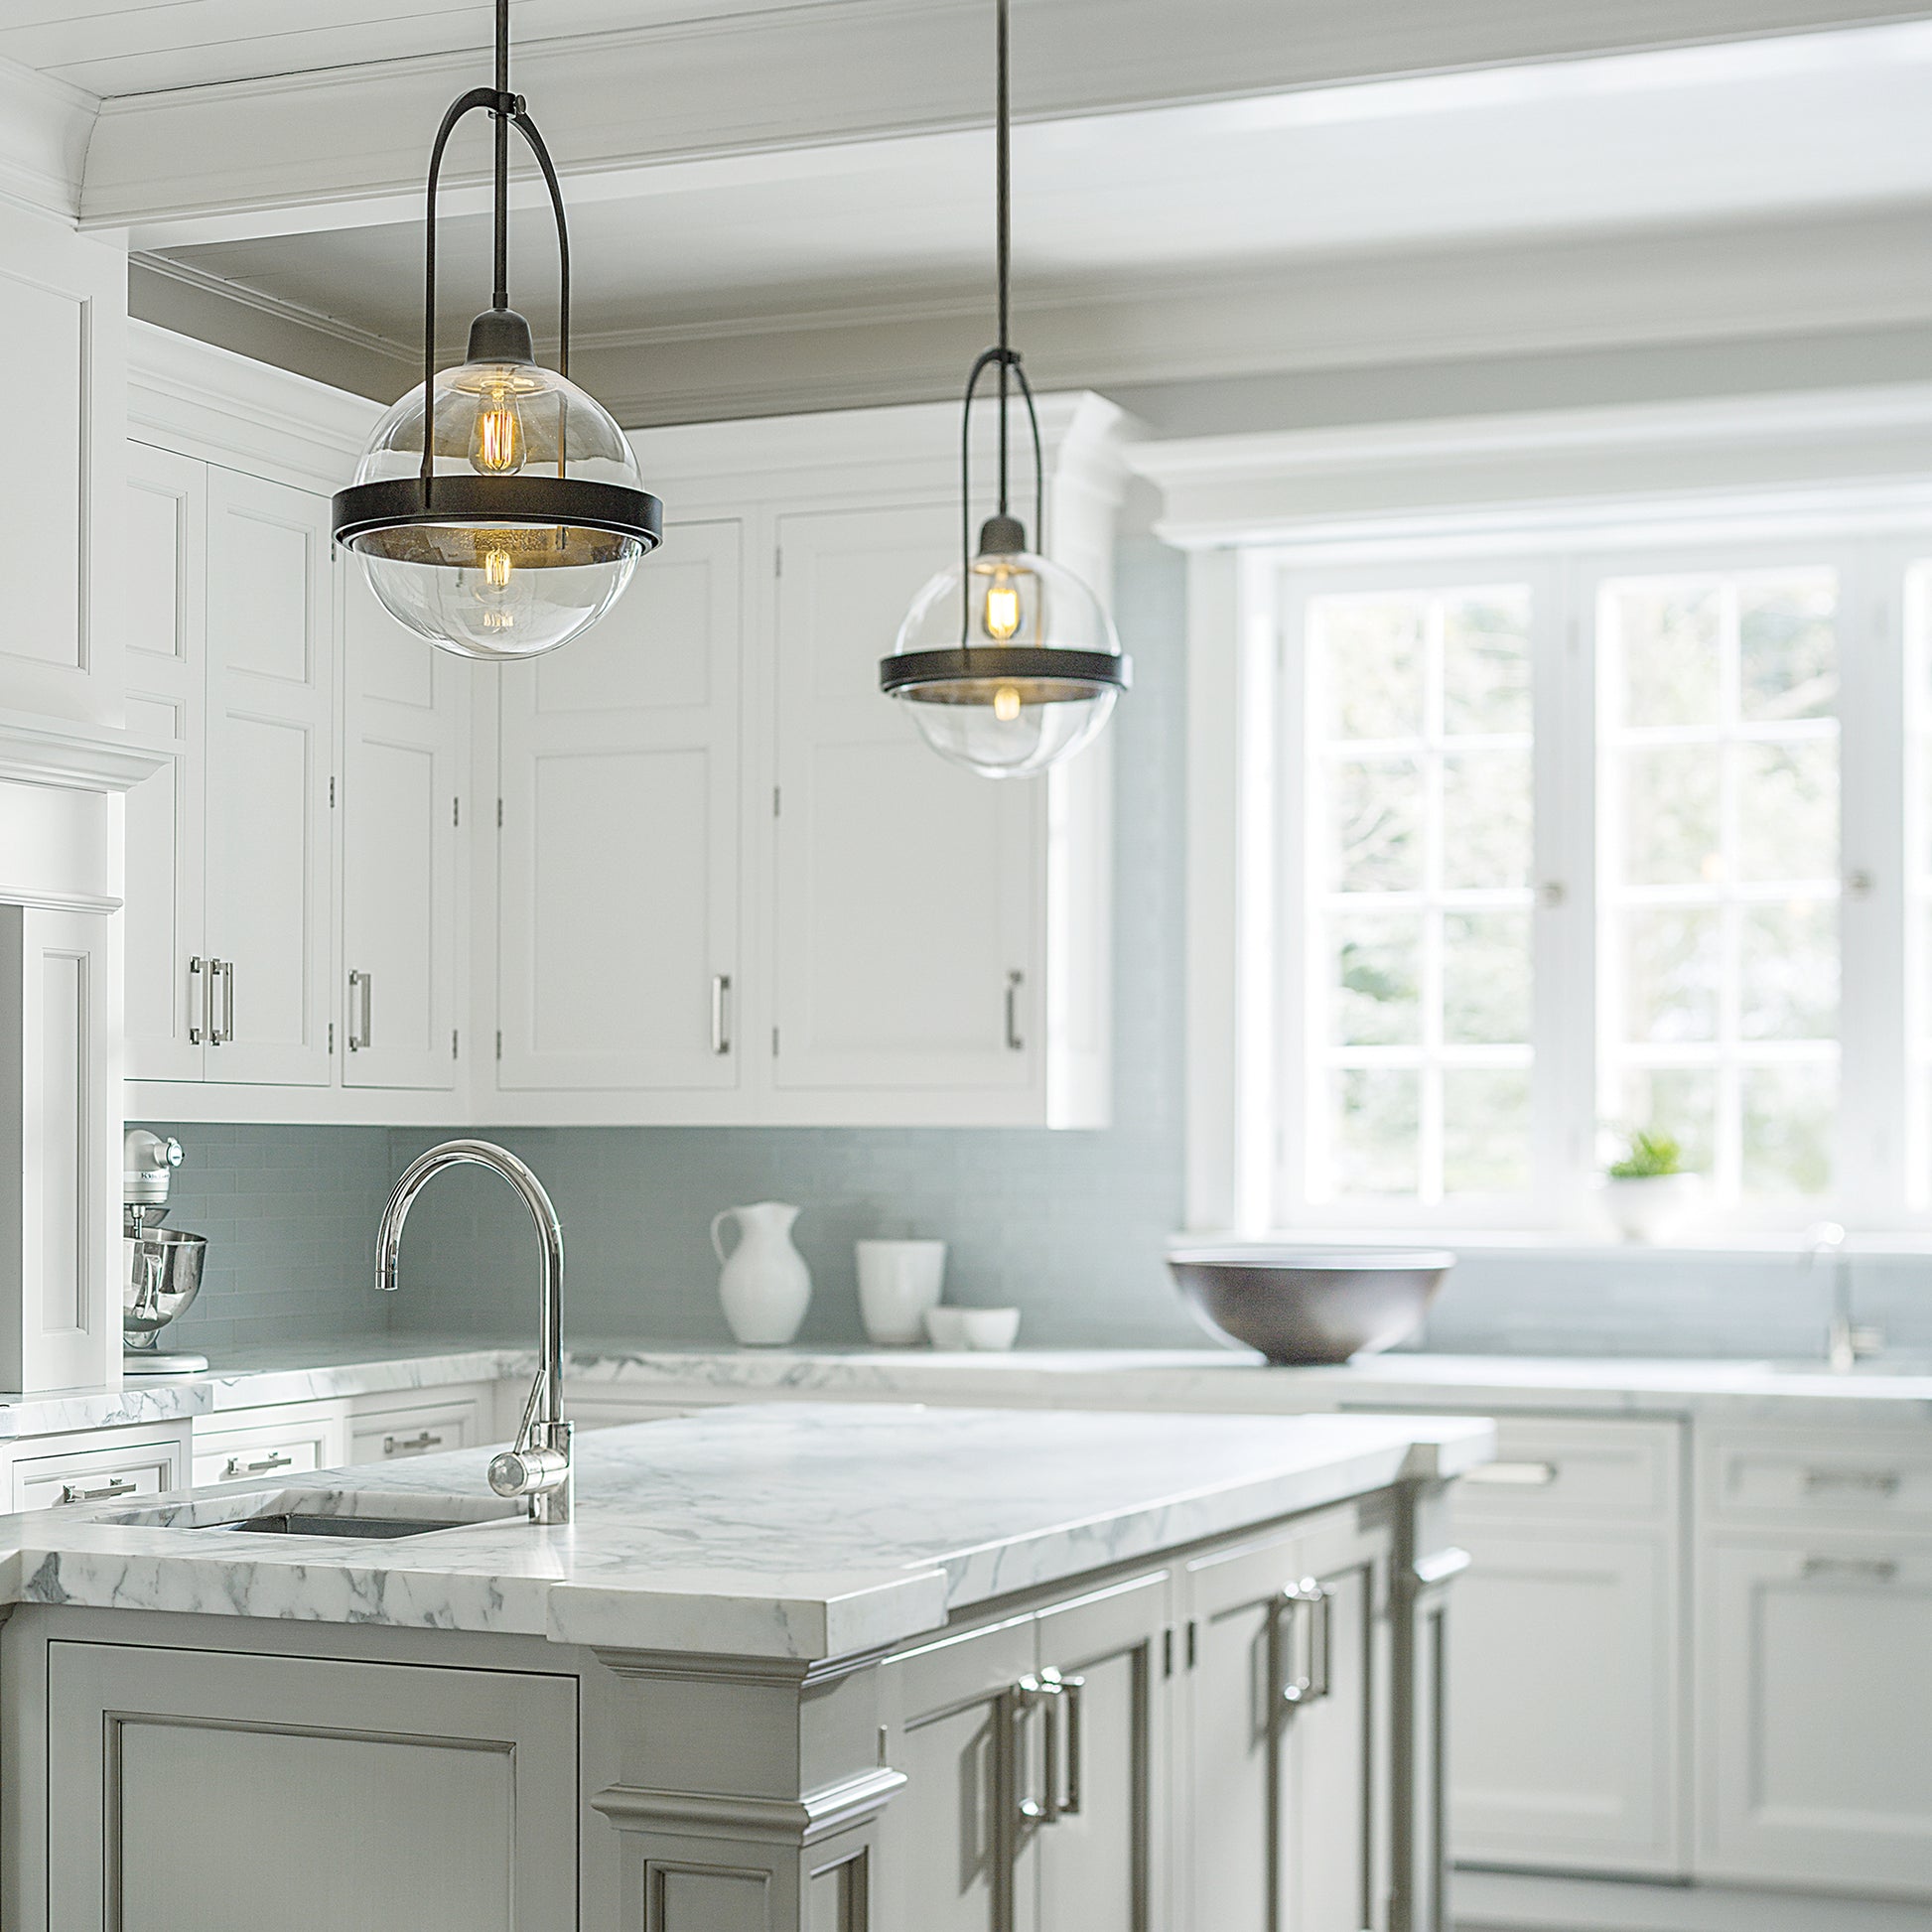 A kitchen with white cabinets illuminated by a handcrafted Hubbardton Forge Atlas Mini Pendant light.